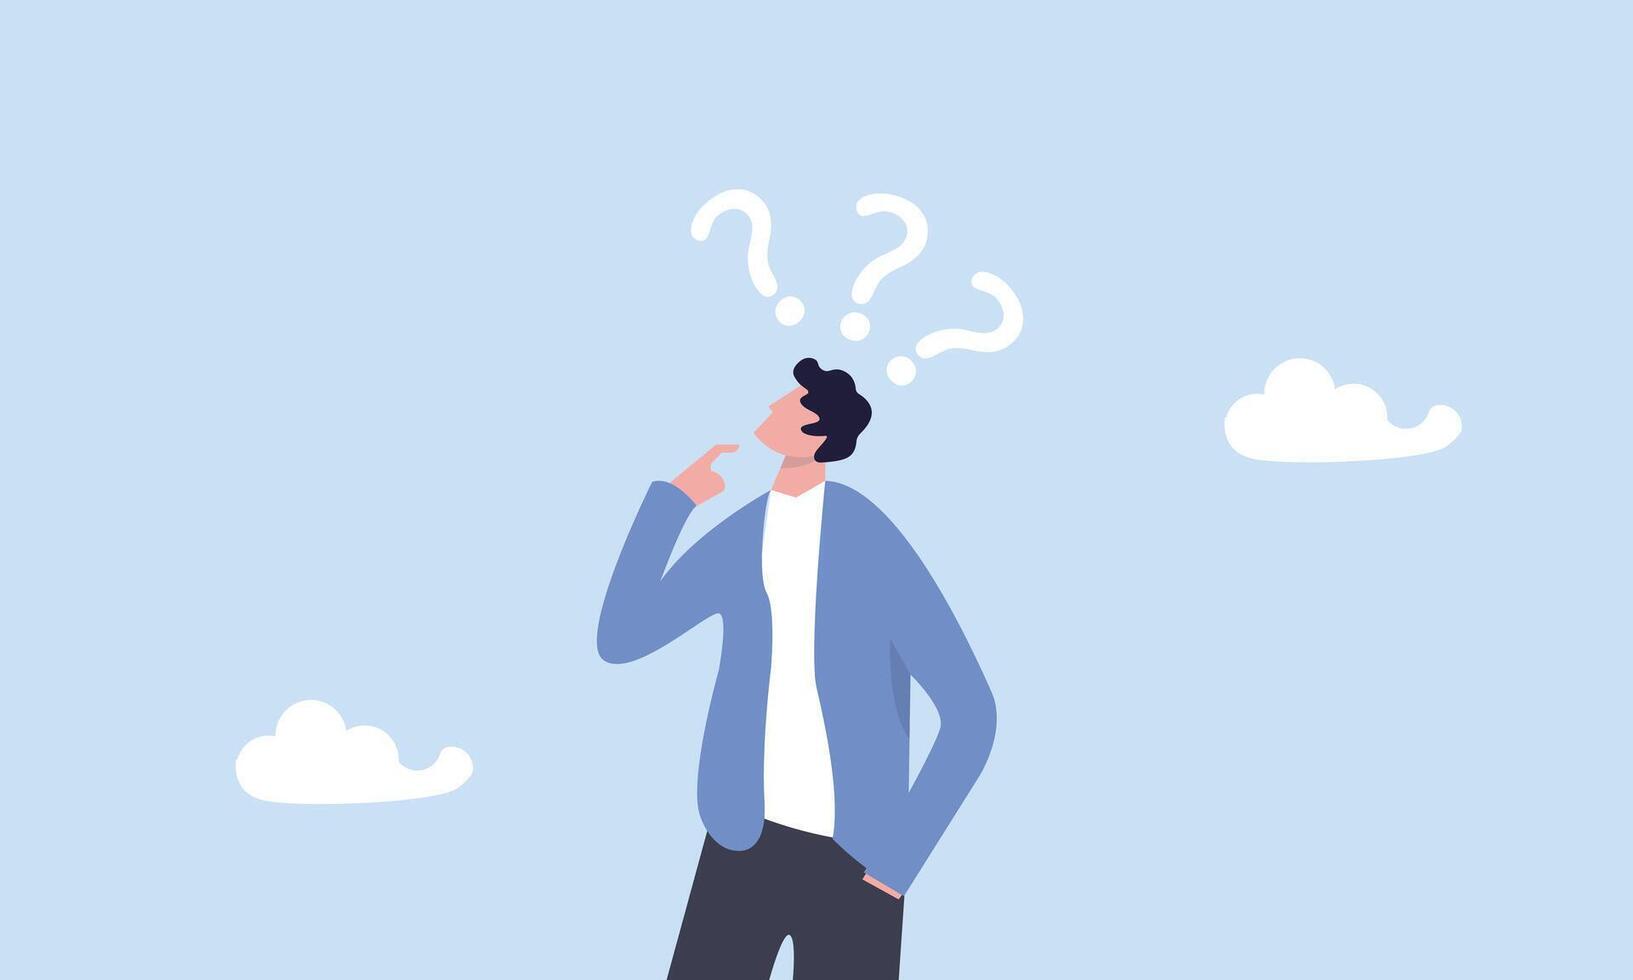 Skeptical, distrust or questioning about business deal, thinking to make decision, doubtful or confusion concept, businessman with suspicious gesture thinking about things with question mark signs. vector